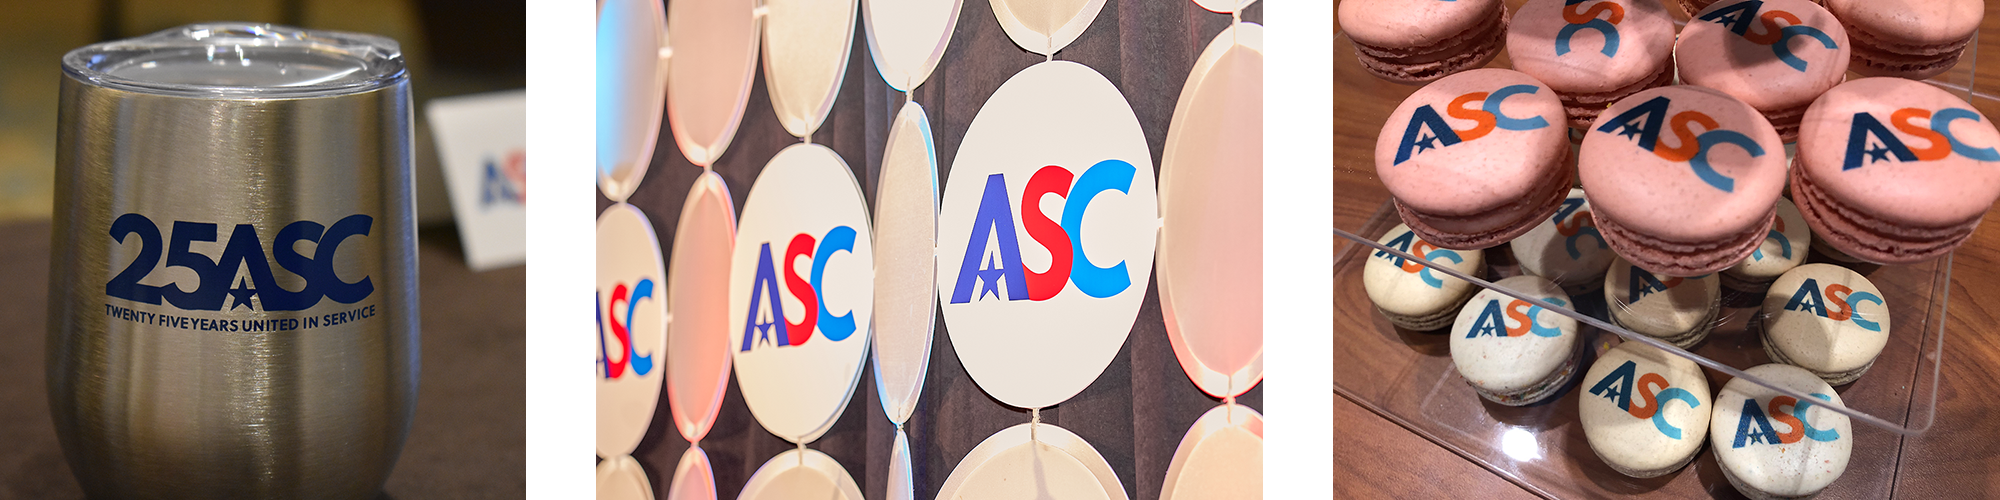 decorative. three photos. 1) silver tumbler with ASC logo in blue. 2) stage backdrop; lots of white circles with ASC logos in some of them. 3) macarons with ASC logo